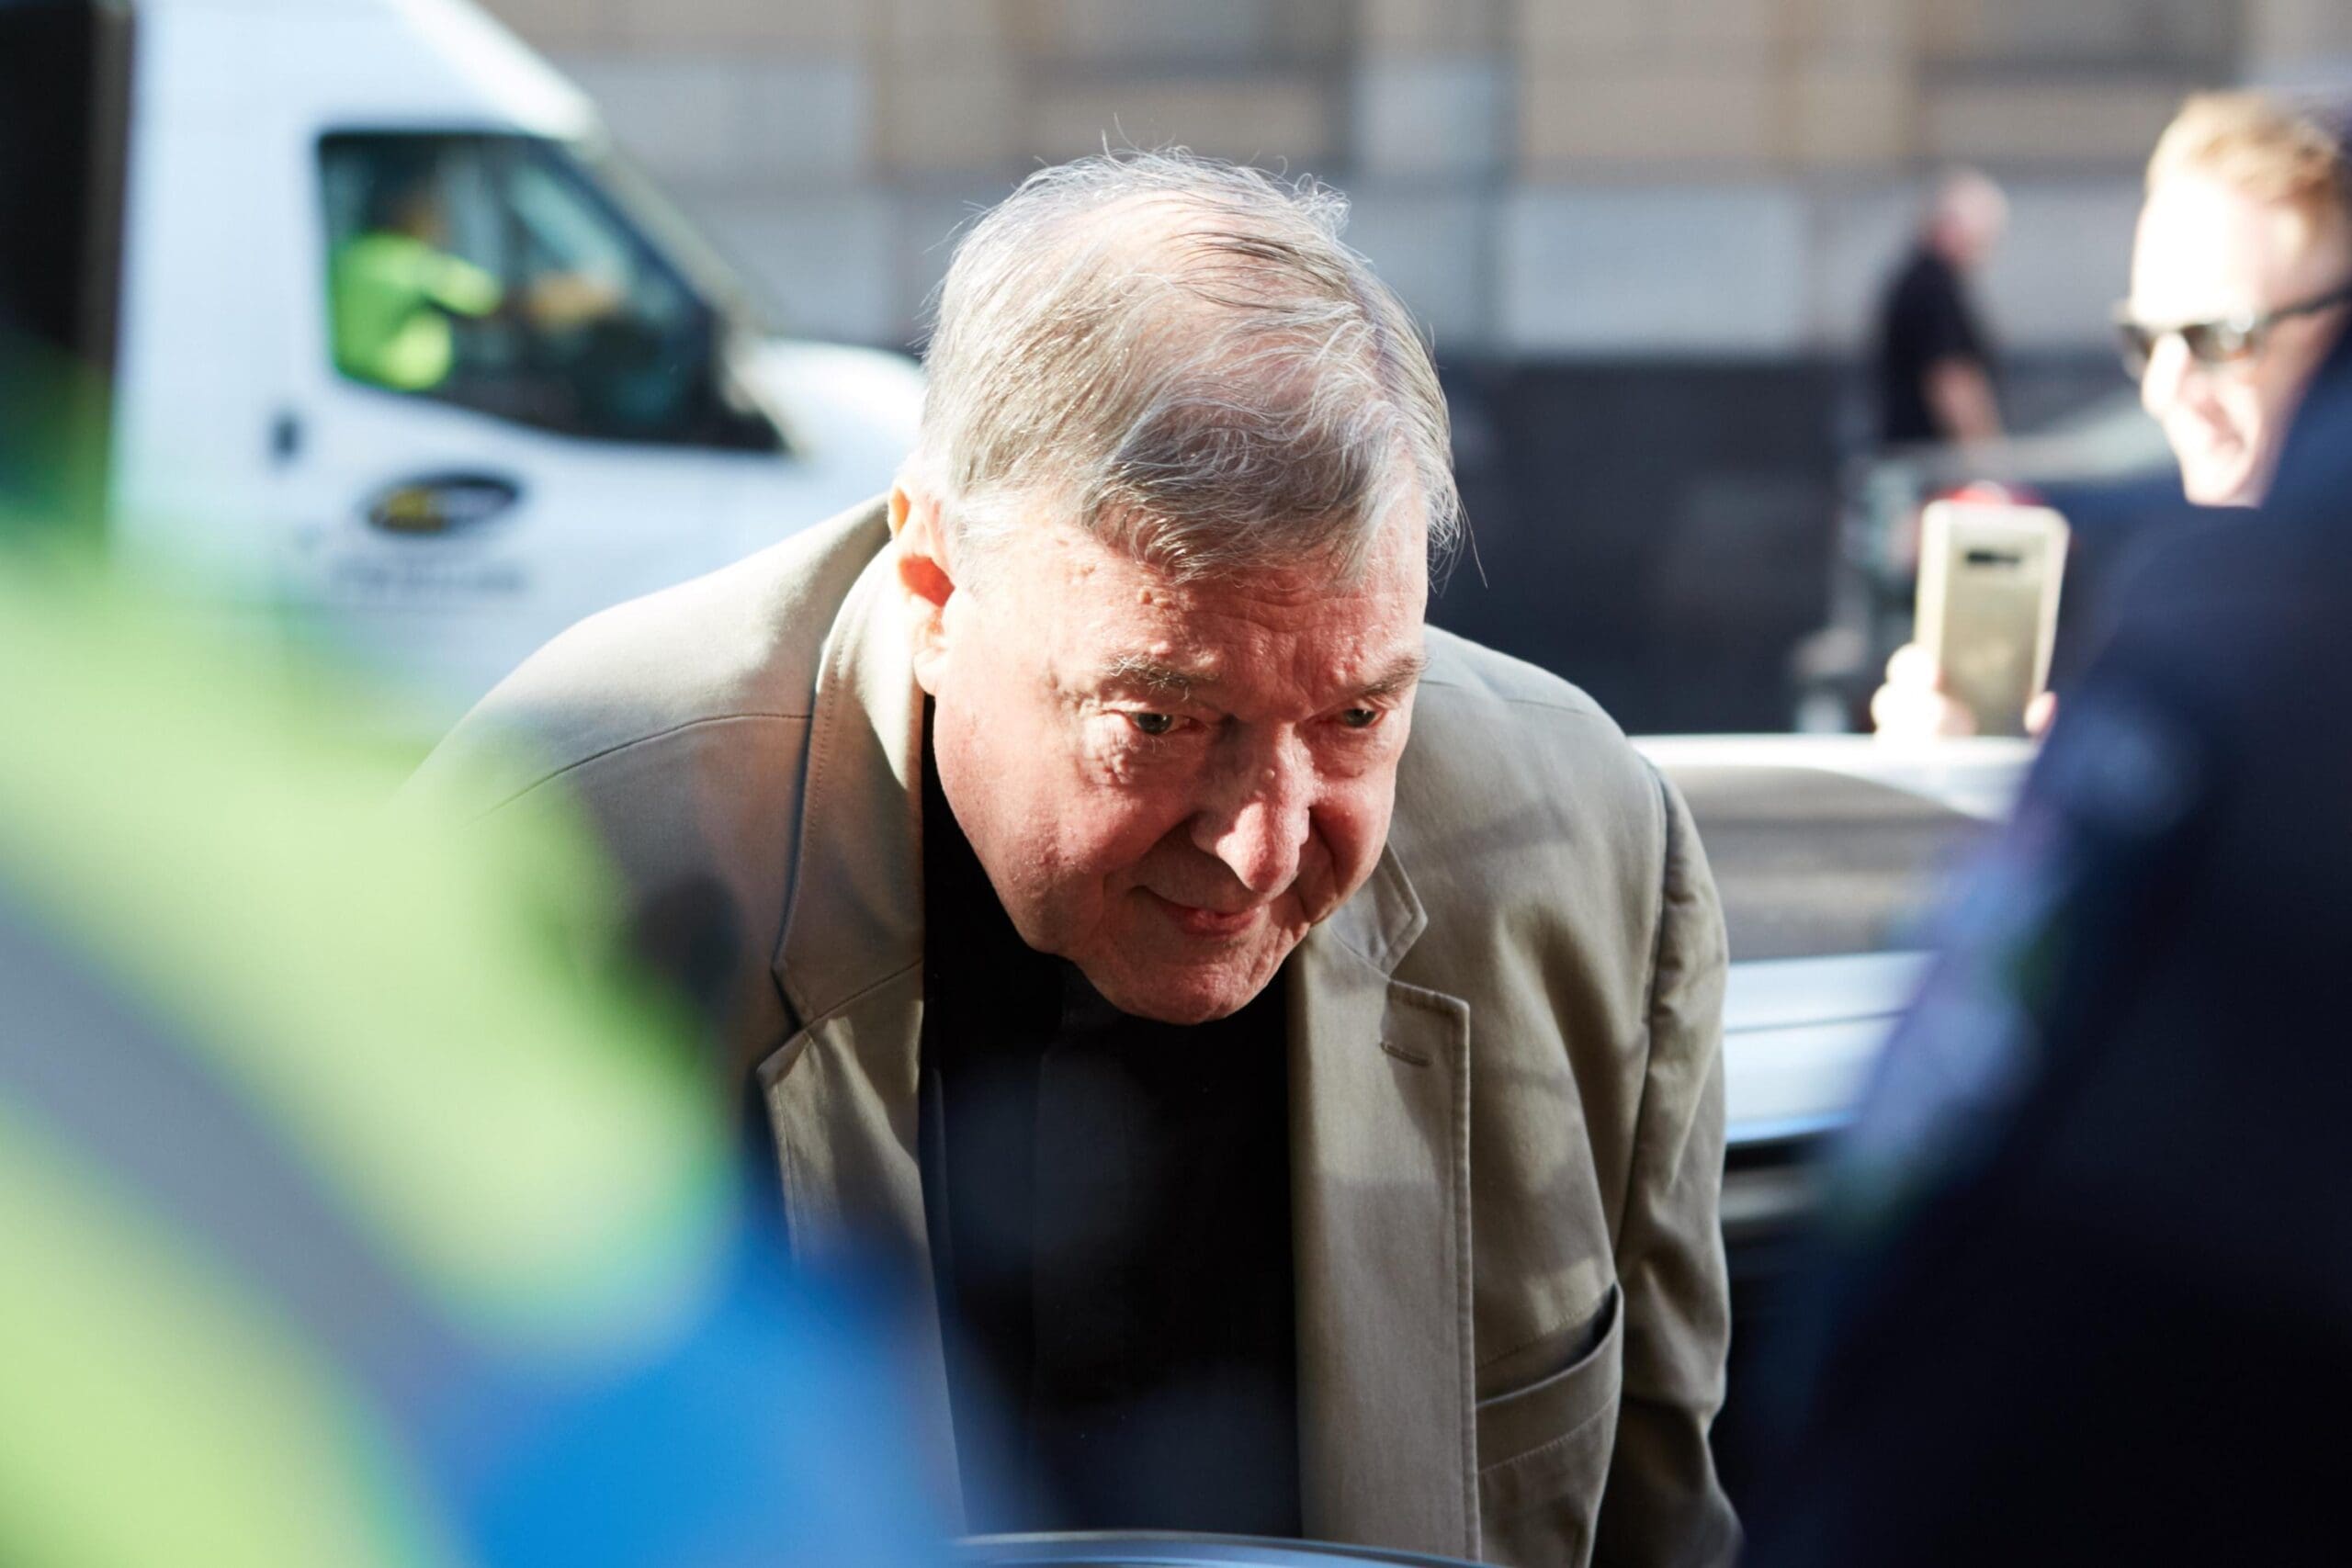 epa07399877 Cardinal George Pell arrives at County Court in Melbourne, Australia, 27 February 2019. Australia's most senior Catholic Cardinal George Pell was found guilty on five charges of child sexual assault after an unanimous verdict on 11 December 2018, the results of which were under a suppression order until being lifted on 26 February 2019.  EPA/ERIK ANDERSON  AUSTRALIA AND NEW ZEALAND OUT